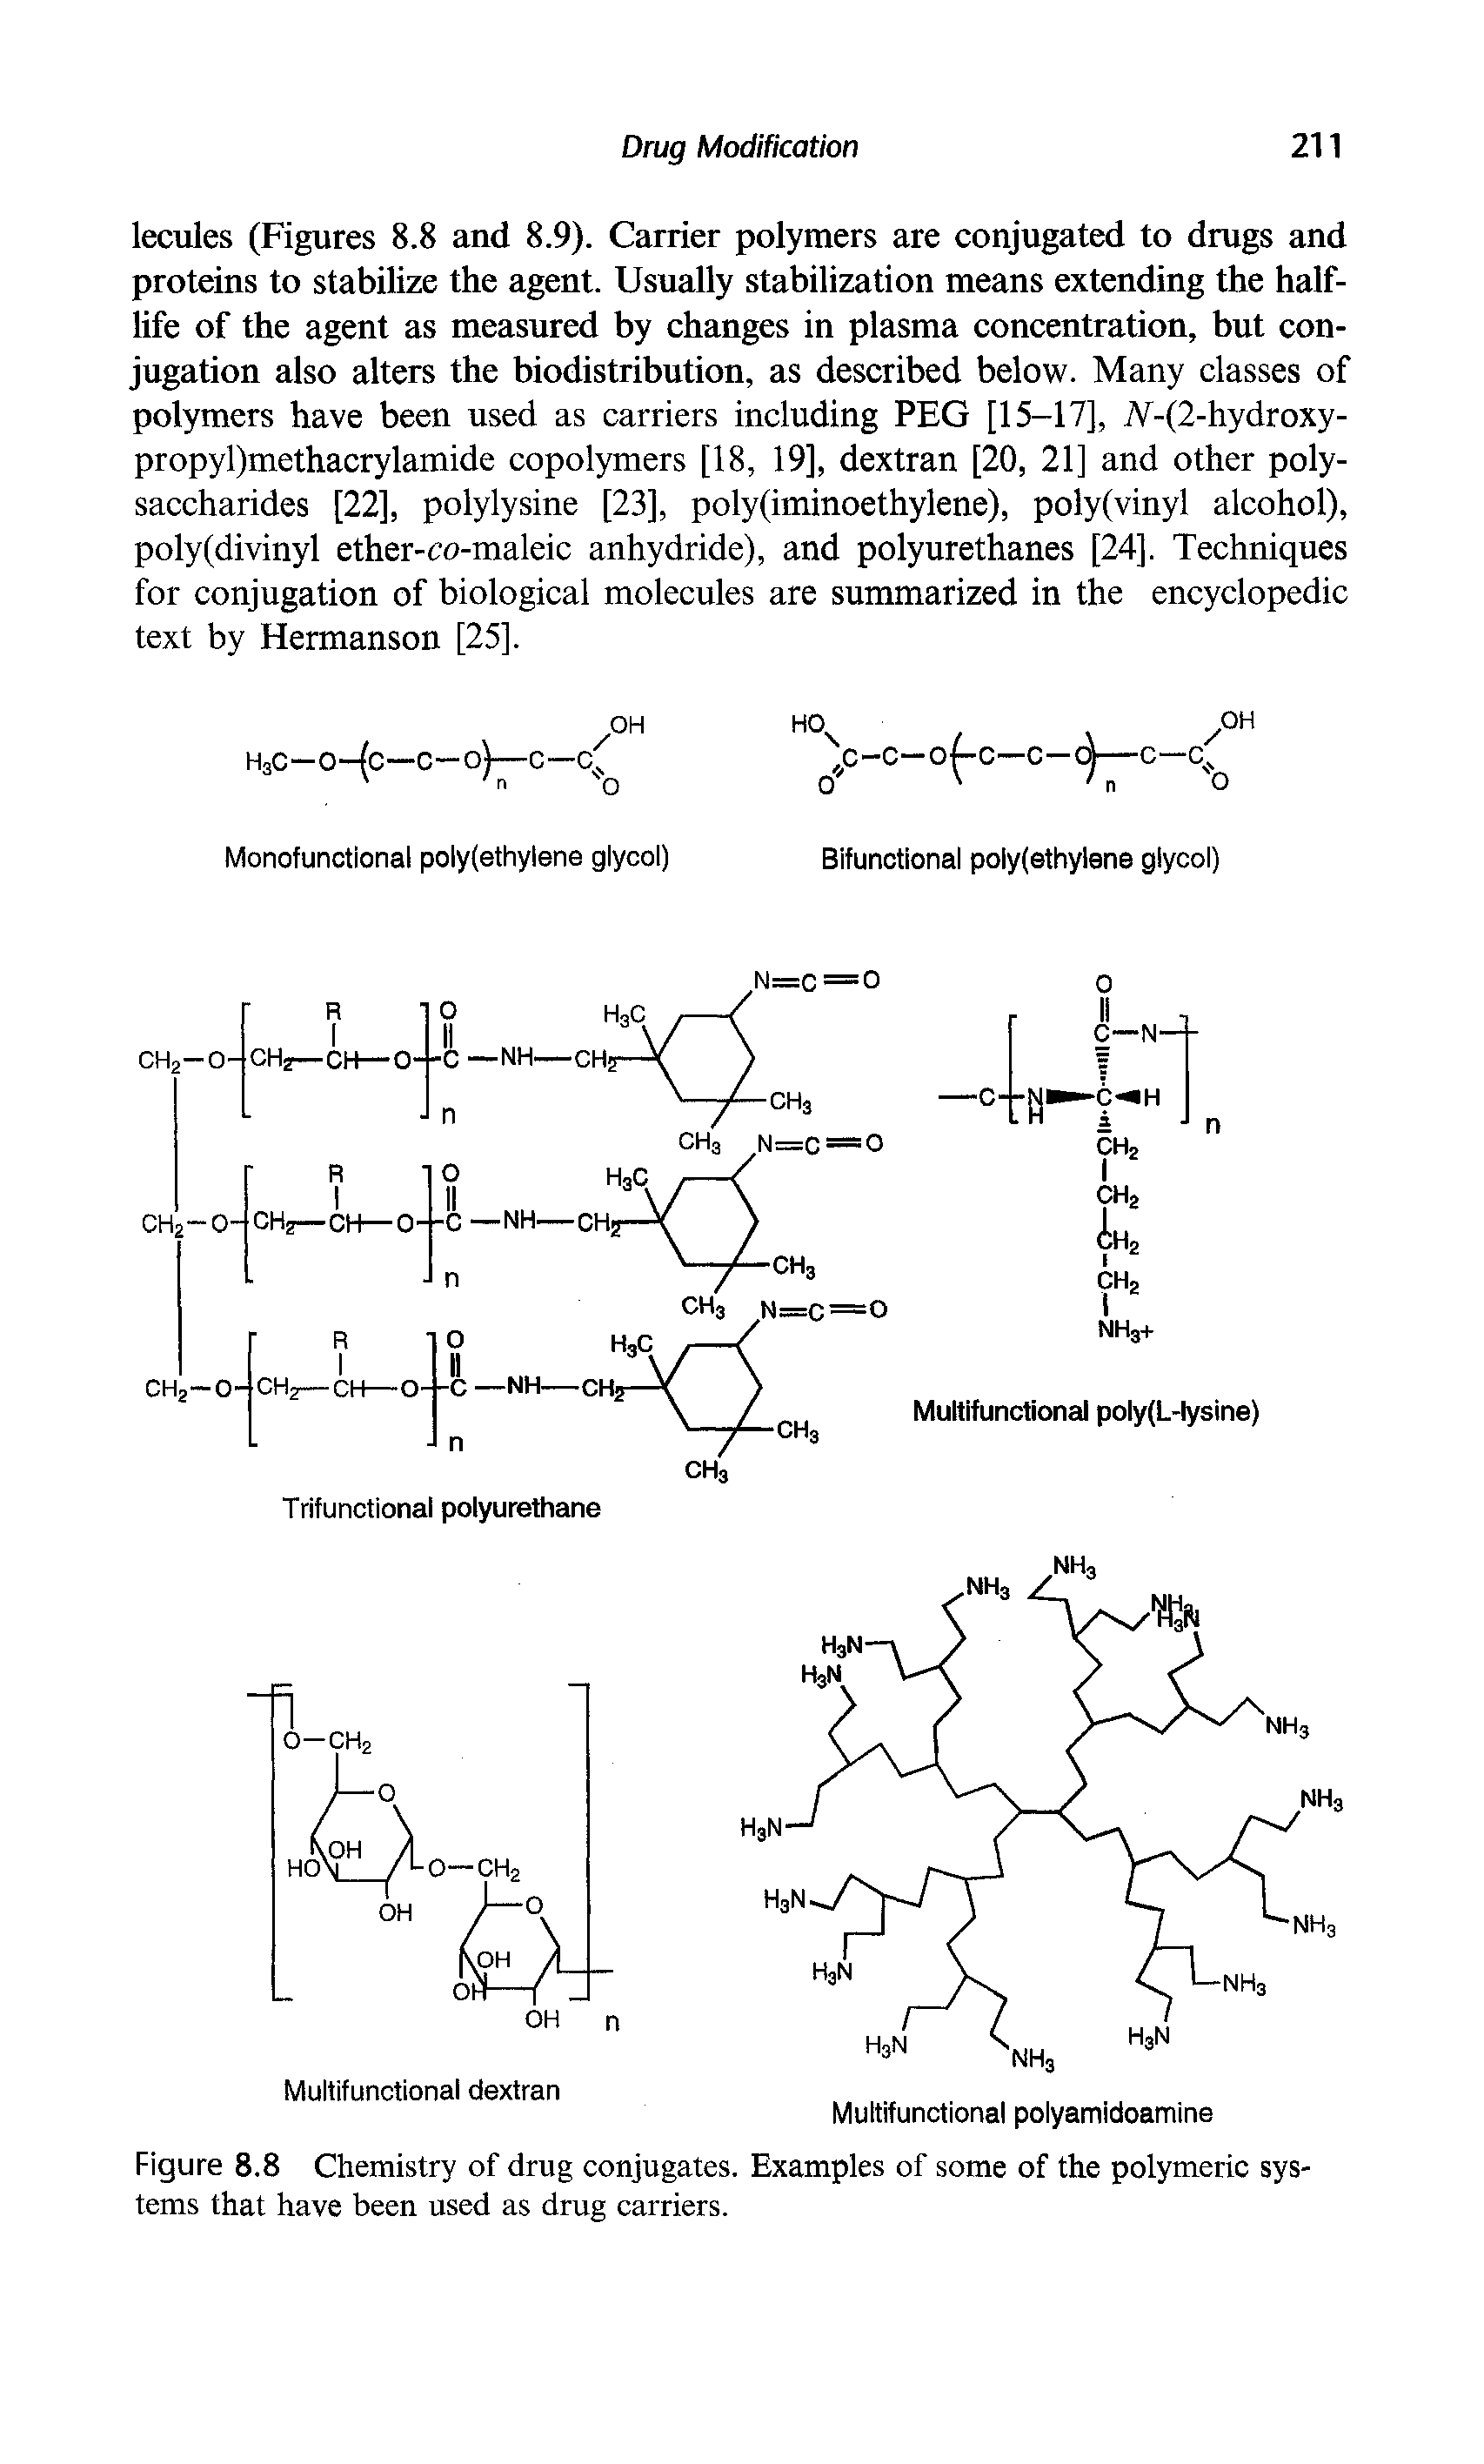 Figure 8.8 Chemistry of drug conjugates. Examples of some of the polymeric systems that have been used as drug carriers.